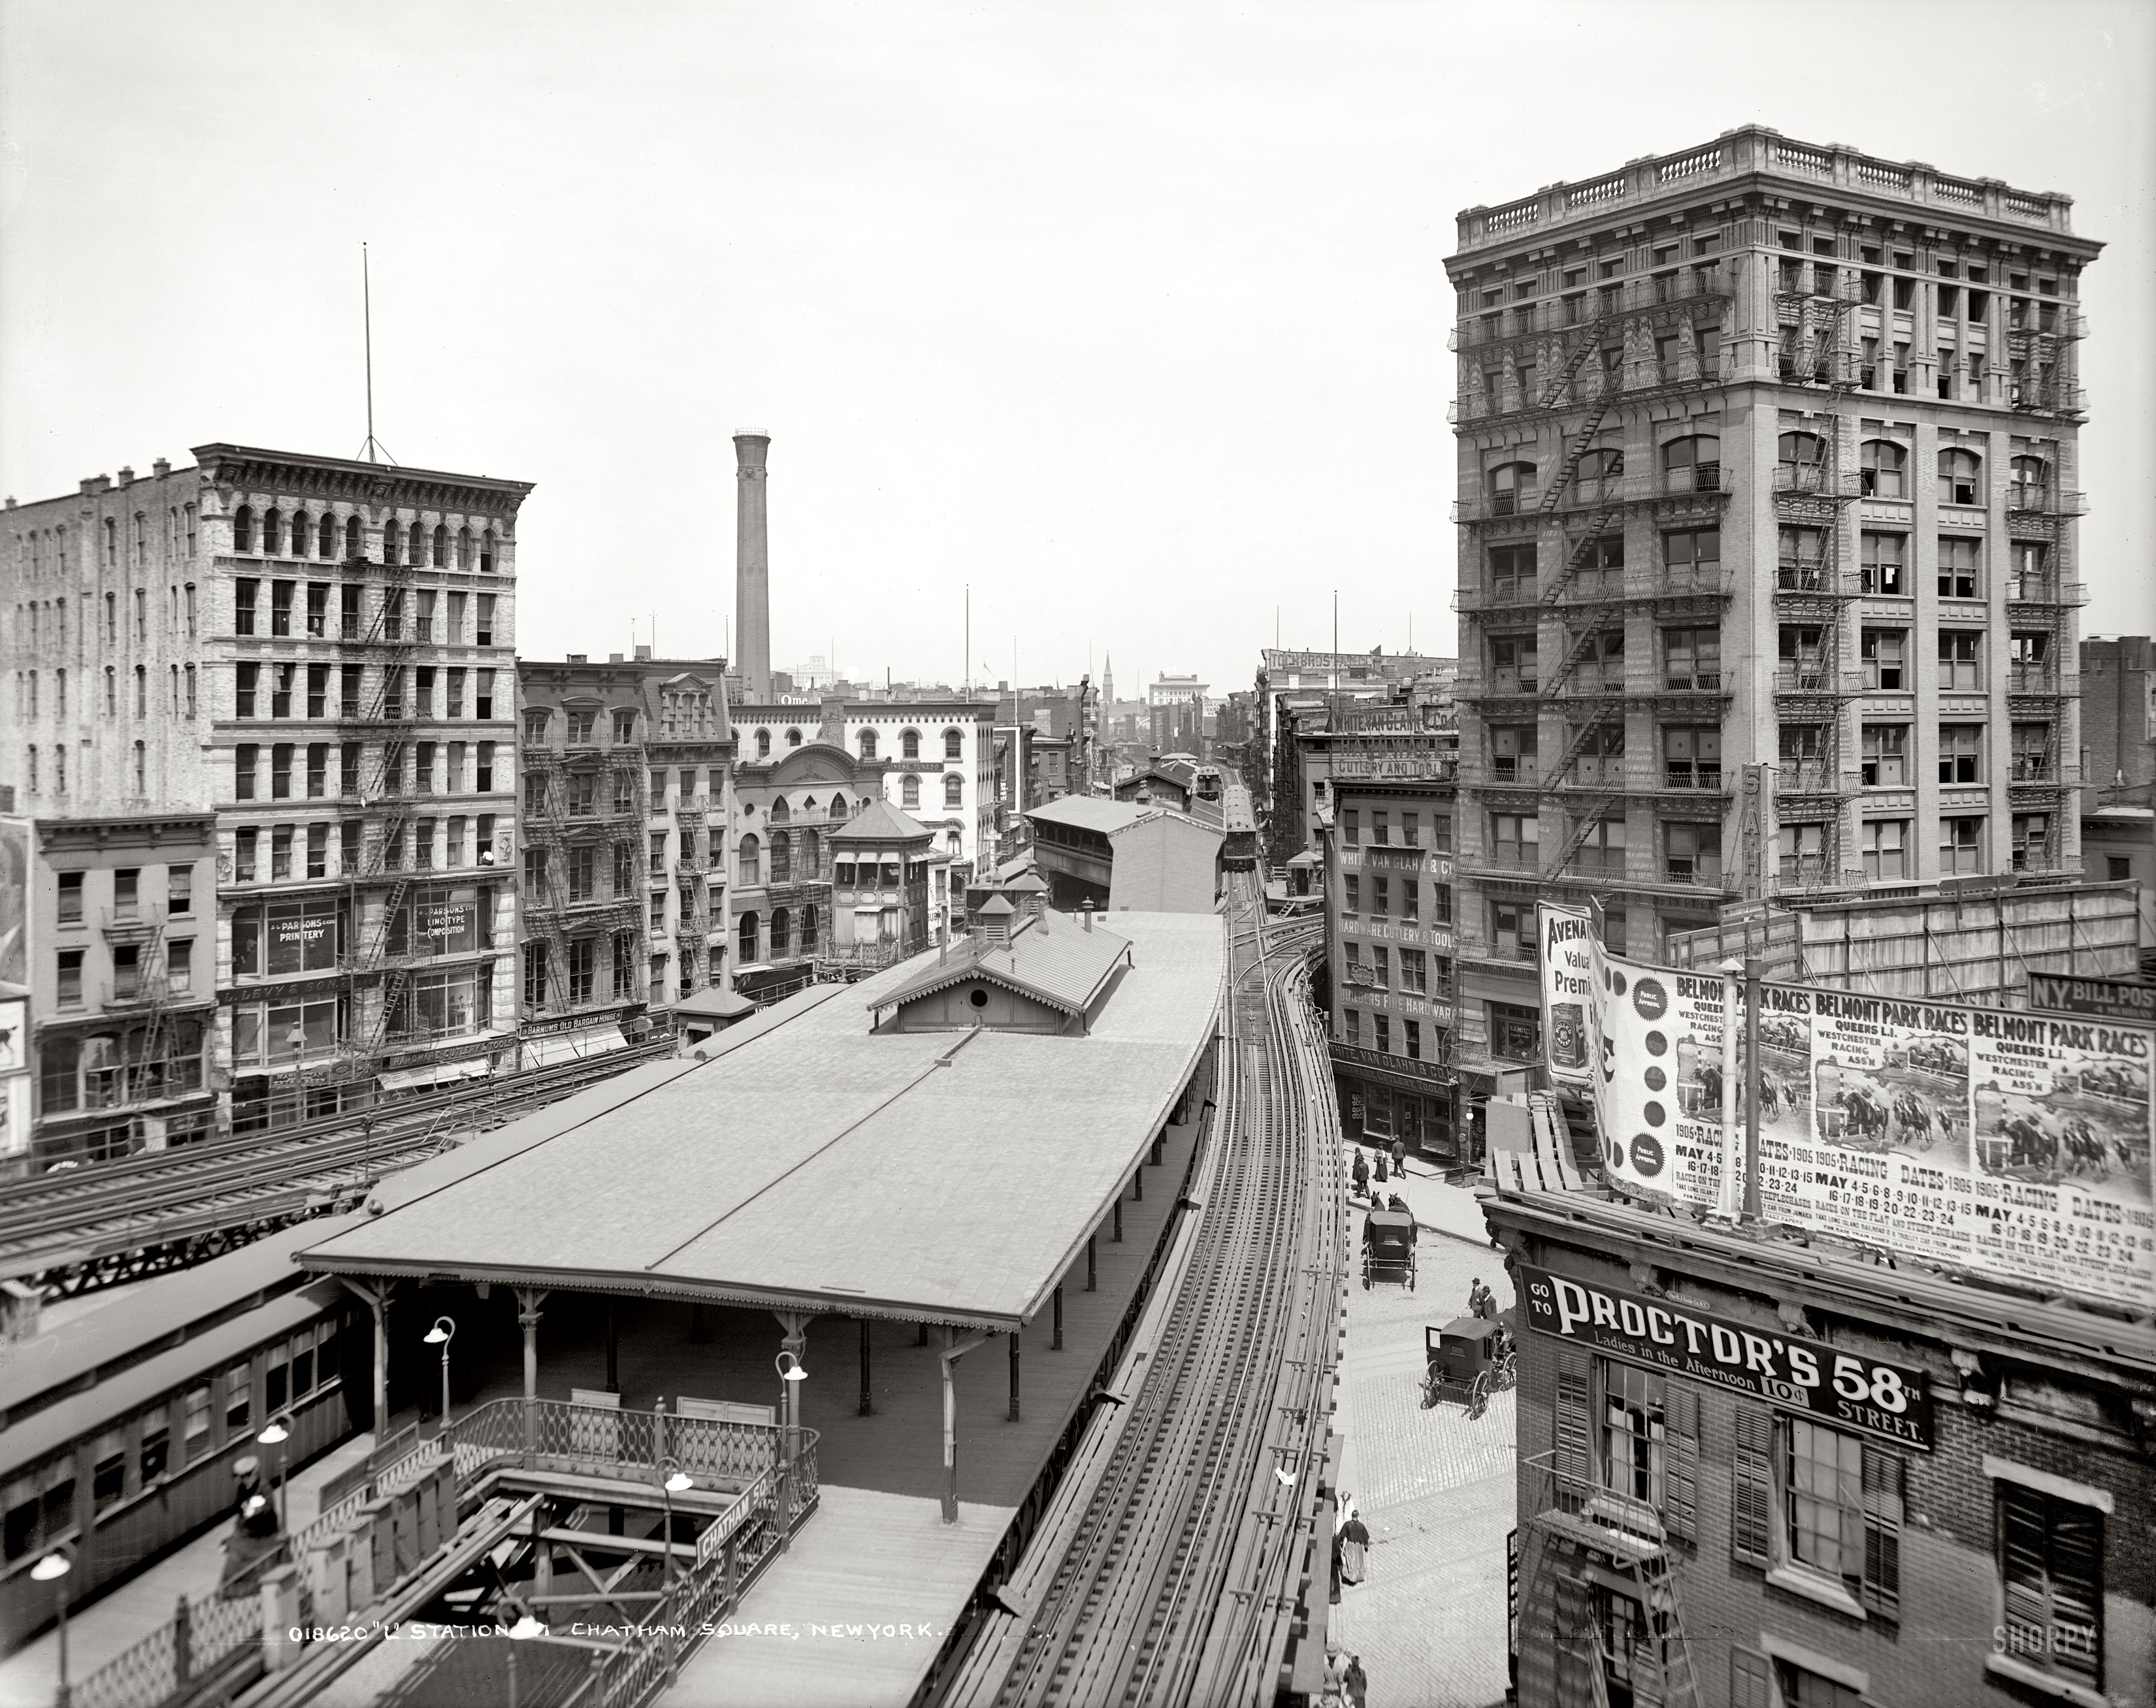 New York City circa 1905. "'L' Station, Chatham Square." 8x10 inch dry plate glass negative, Detroit Publishing Company. View full size.